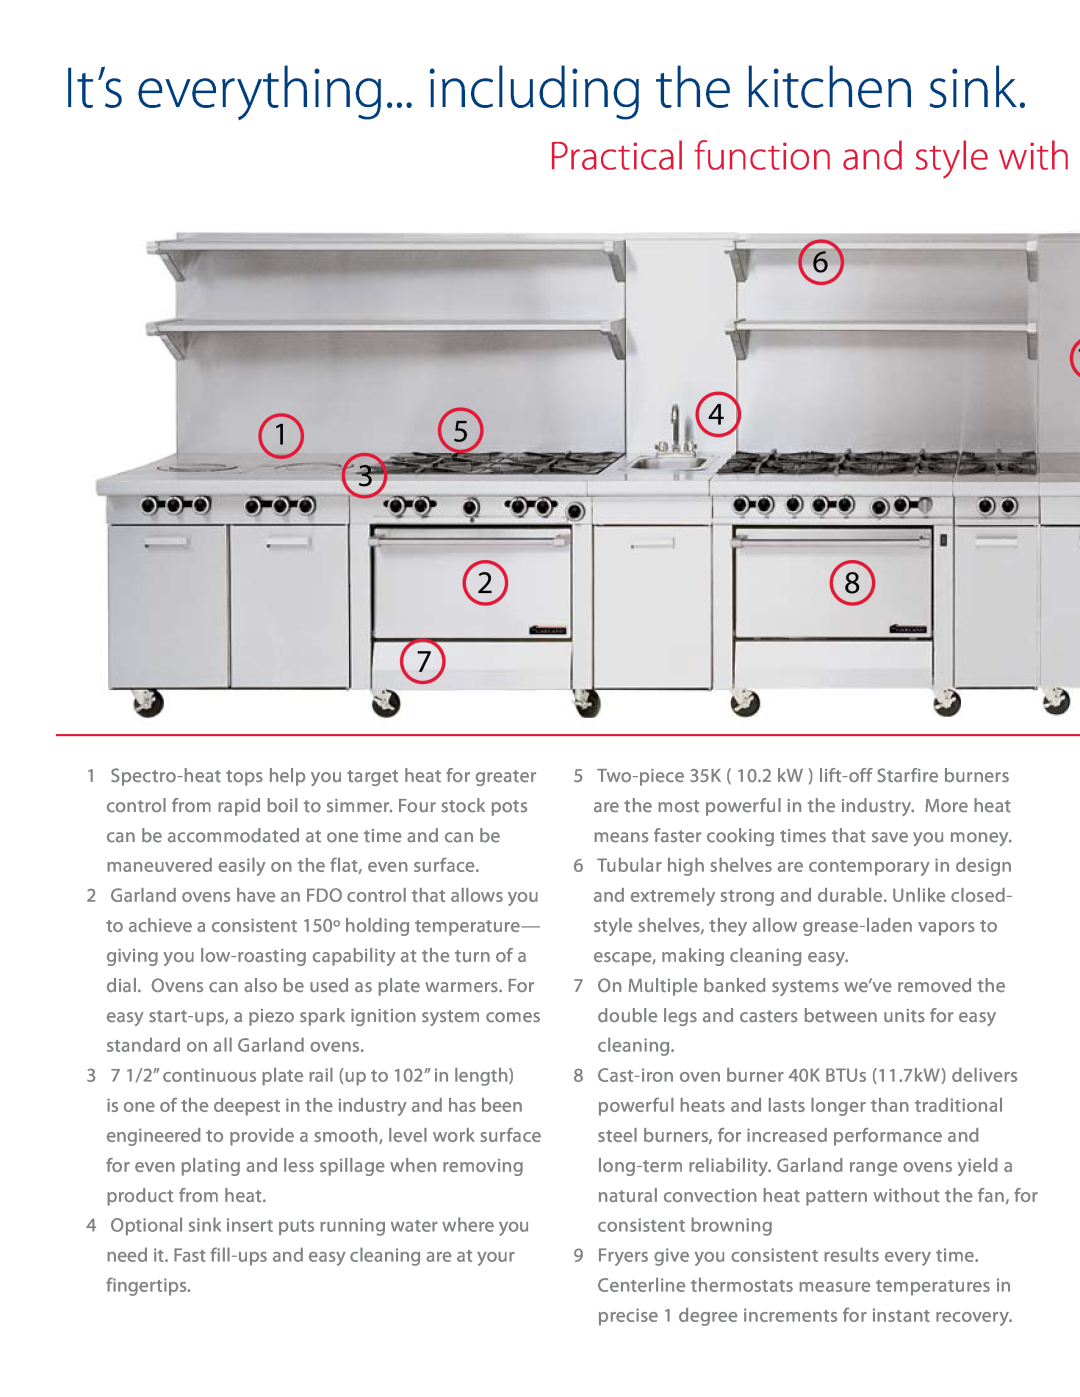 Garland Master Series manual Practical function and style with, It’s everything... including the kitchen sink 